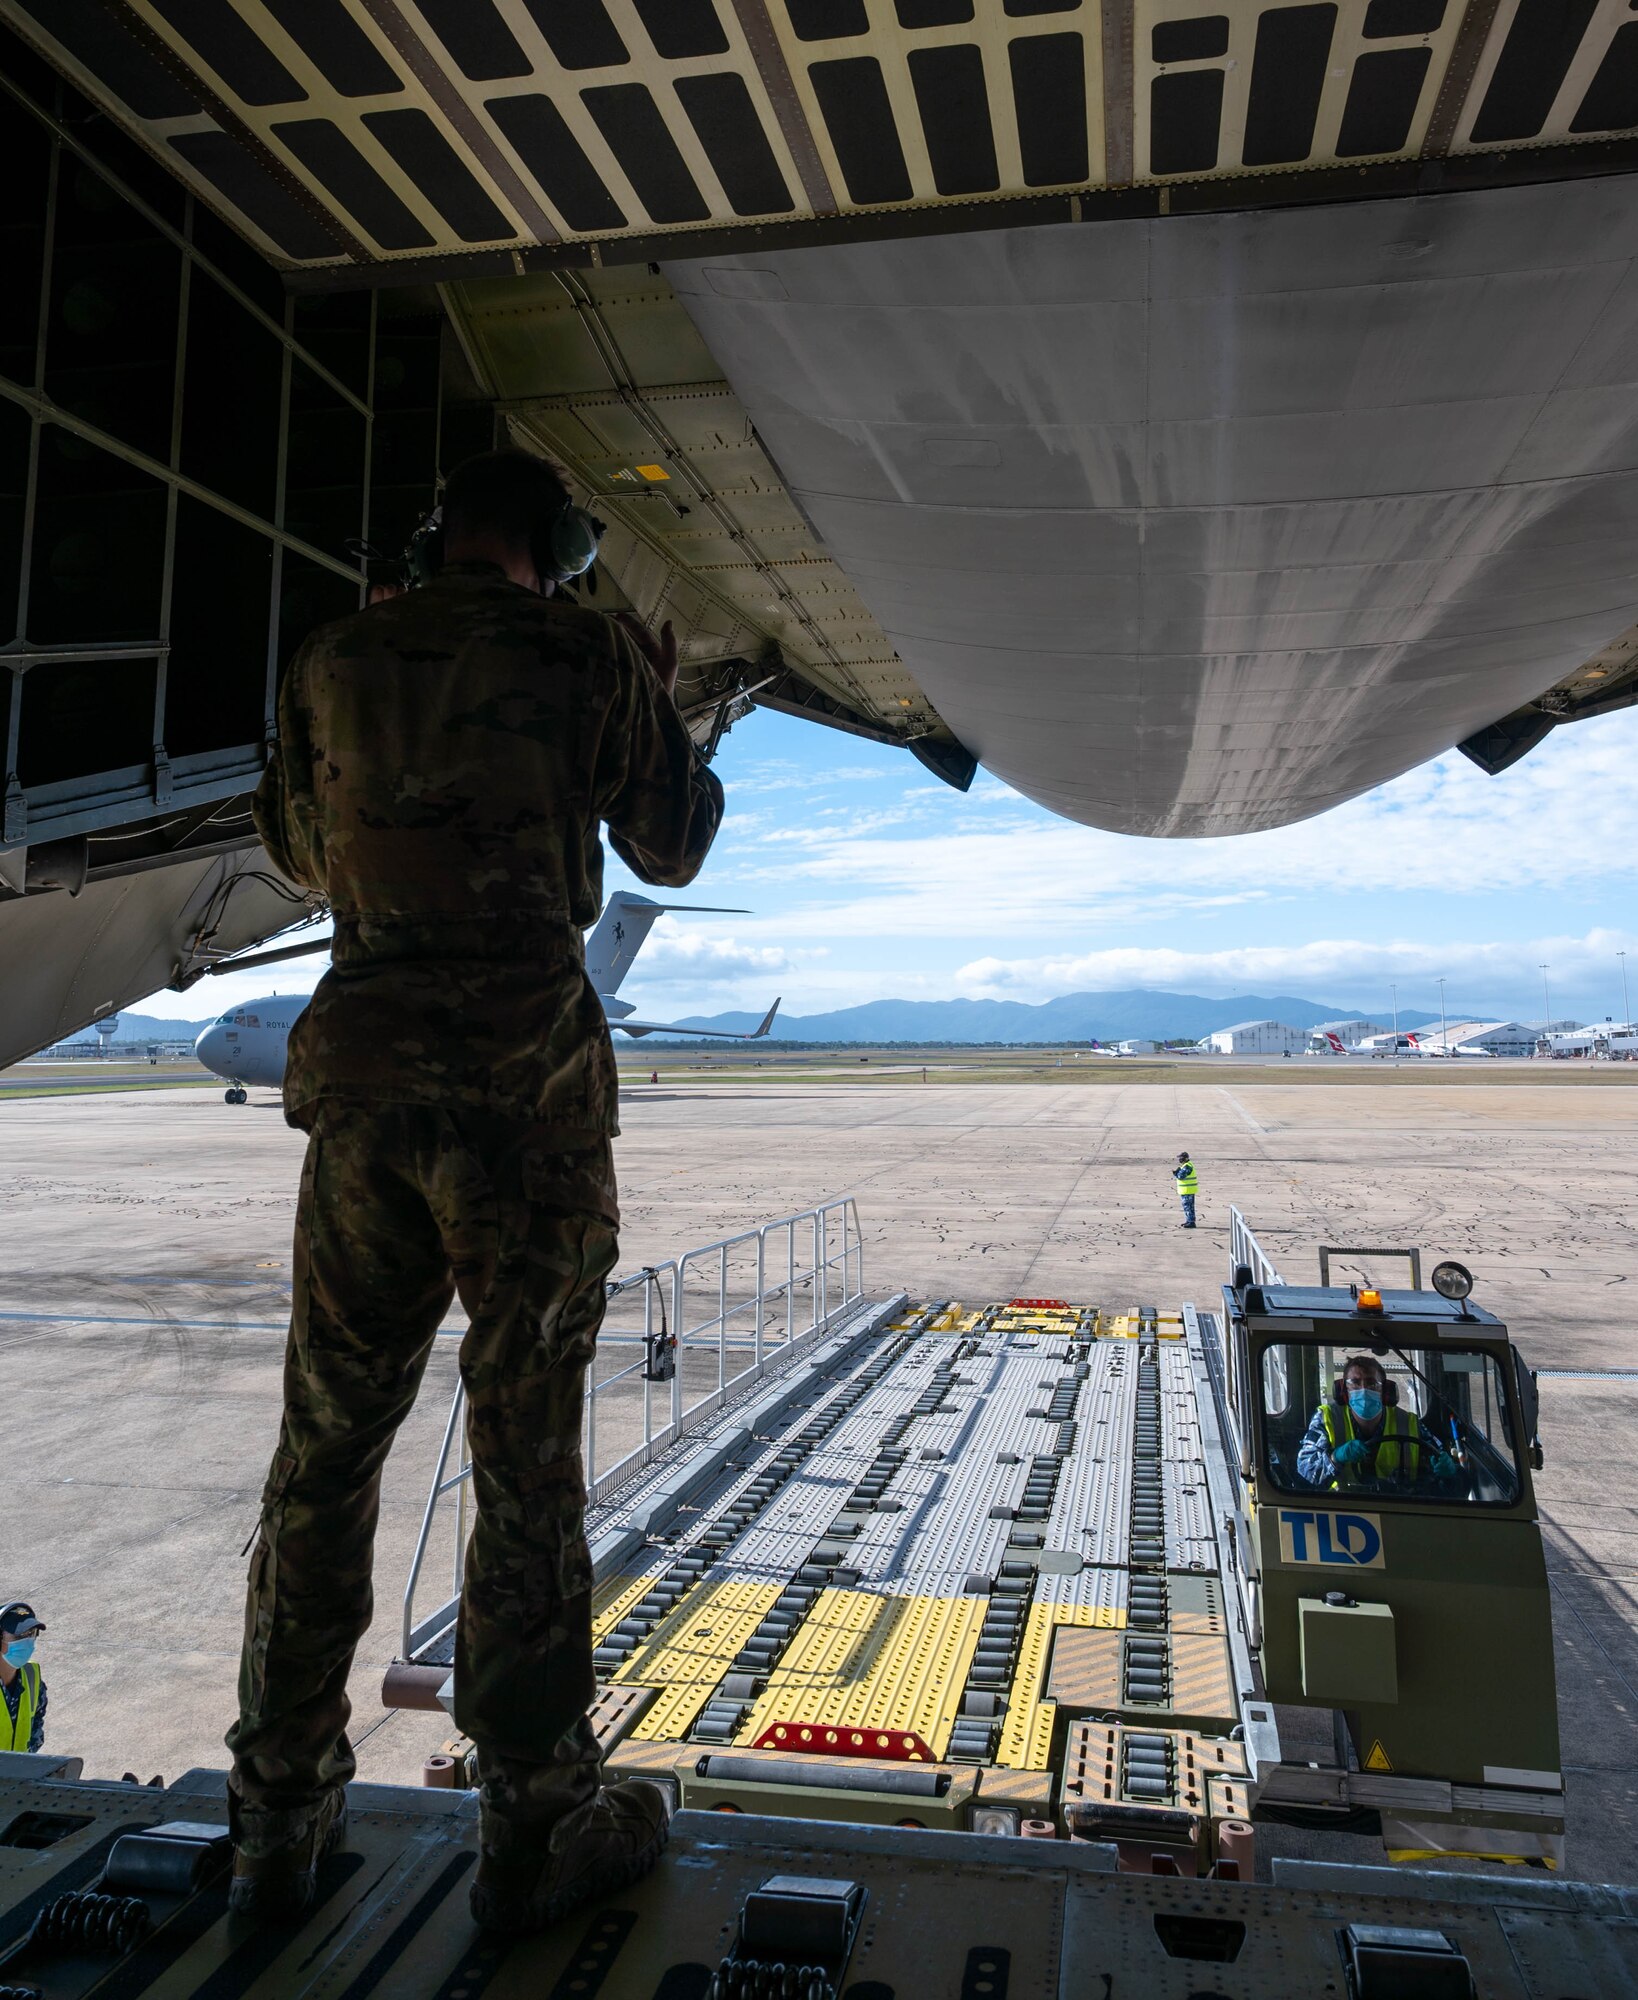 U.S. Air Force Staff Sgt. John Dittess, 9th Airlift Squadron loadmaster, marshals a K-loader to the ramp of a Dover Air Force Base C-5M Super Galaxy at Royal Australian Air Force Base Townsville, Australia, July 7, 2021. The C-5 transported two CH-47F Chinook helicopters to RAAF Base Townsville as a part of the Department of Defense’s Foreign Military Sales program. The U.S. and Australia maintain a robust relationship underpinned by shared democratic values, common interests and cultural bonds. The strong alliance is an anchor for peace and stability in the Indo-Pacific region and around the world. (U.S. Air Force photo by Senior Airman Faith Schaefer)